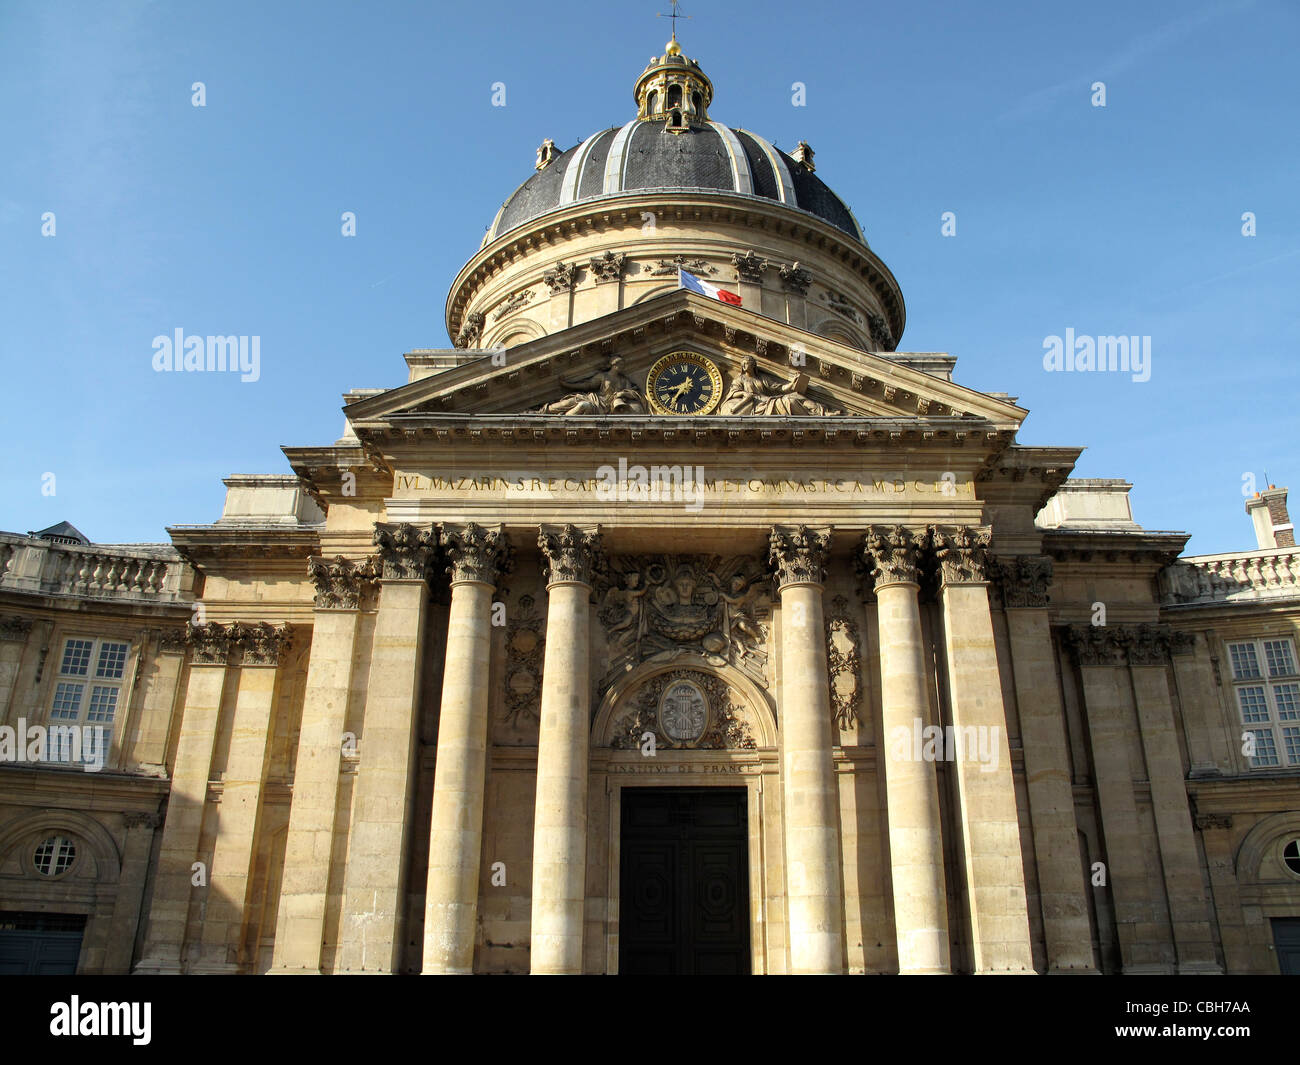 French Academy,French Institute dome,St Germain des Pres, Old town, Paris 6, France,Academie Francaise Stock Photo